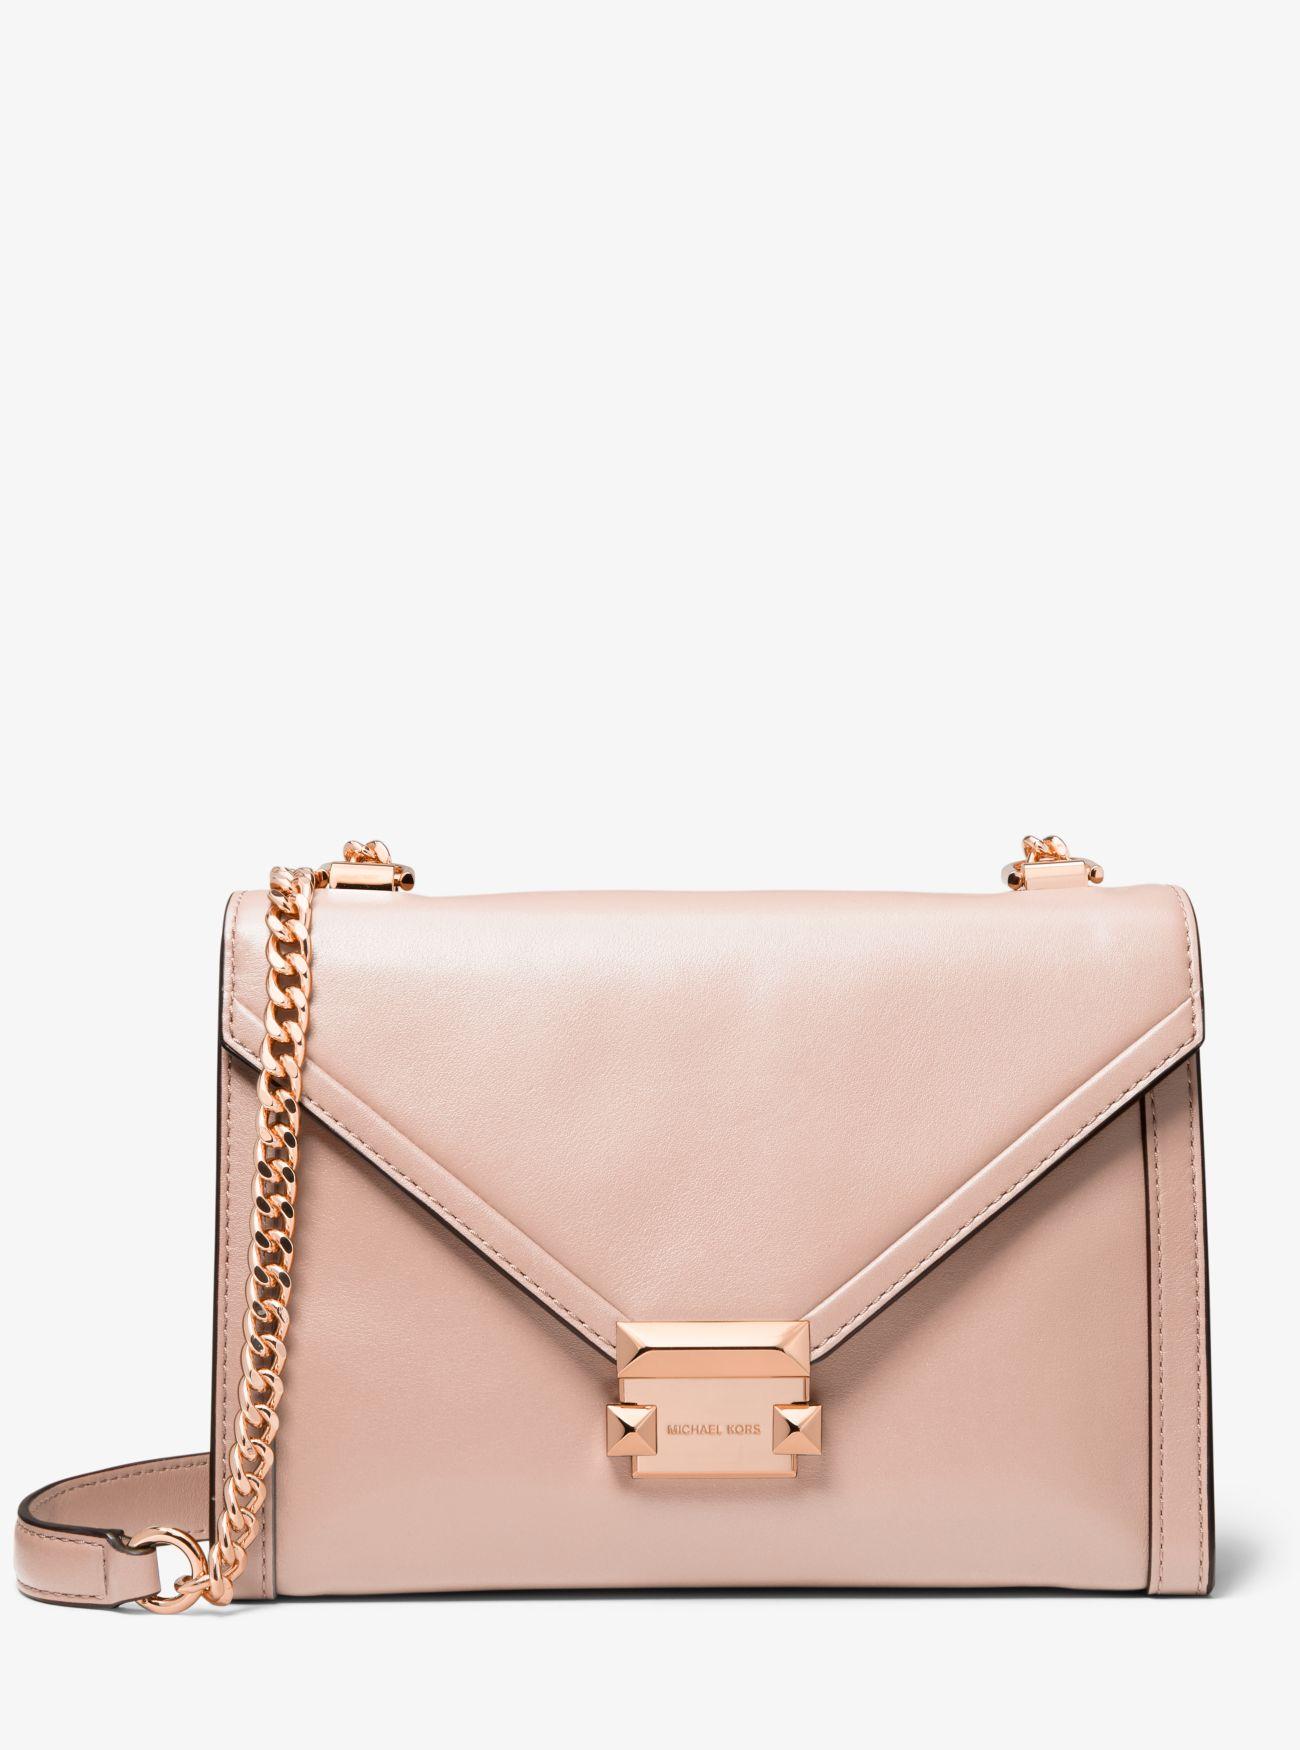 Lyst - Michael Kors Whitney Large Leather Convertible Shoulder Bag in Pink